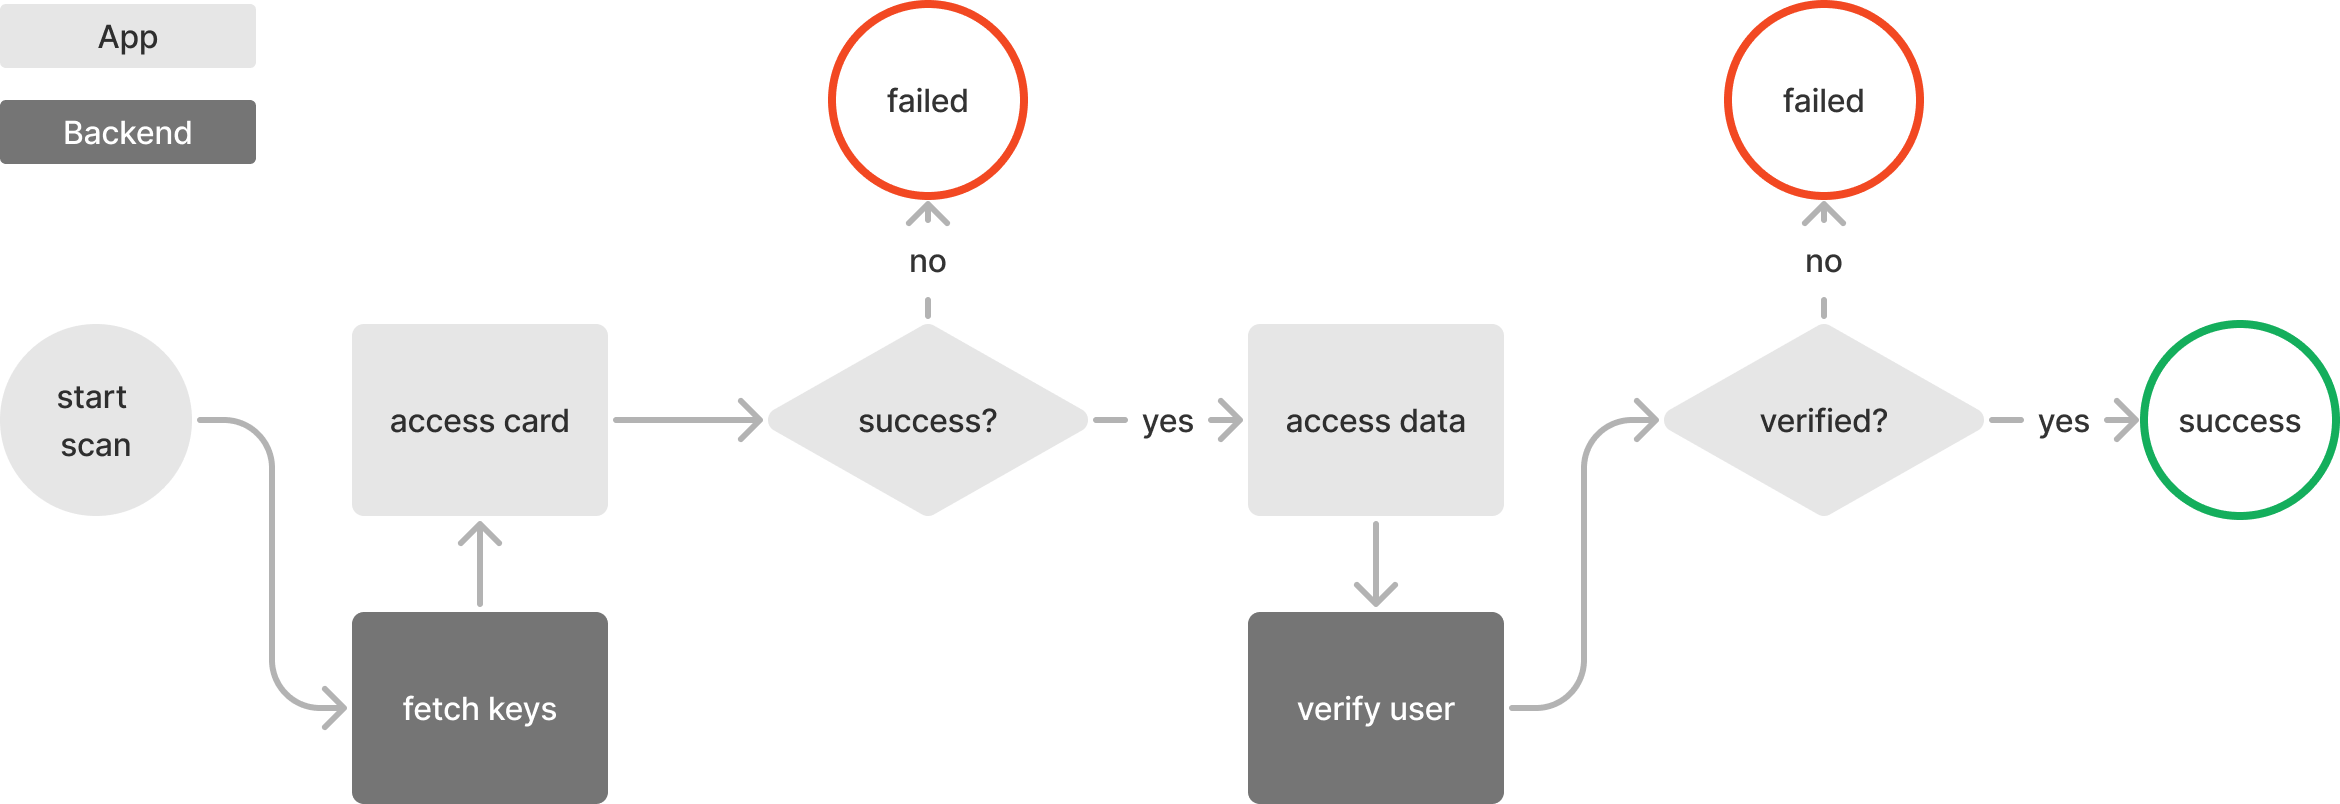 example workflow of authentication